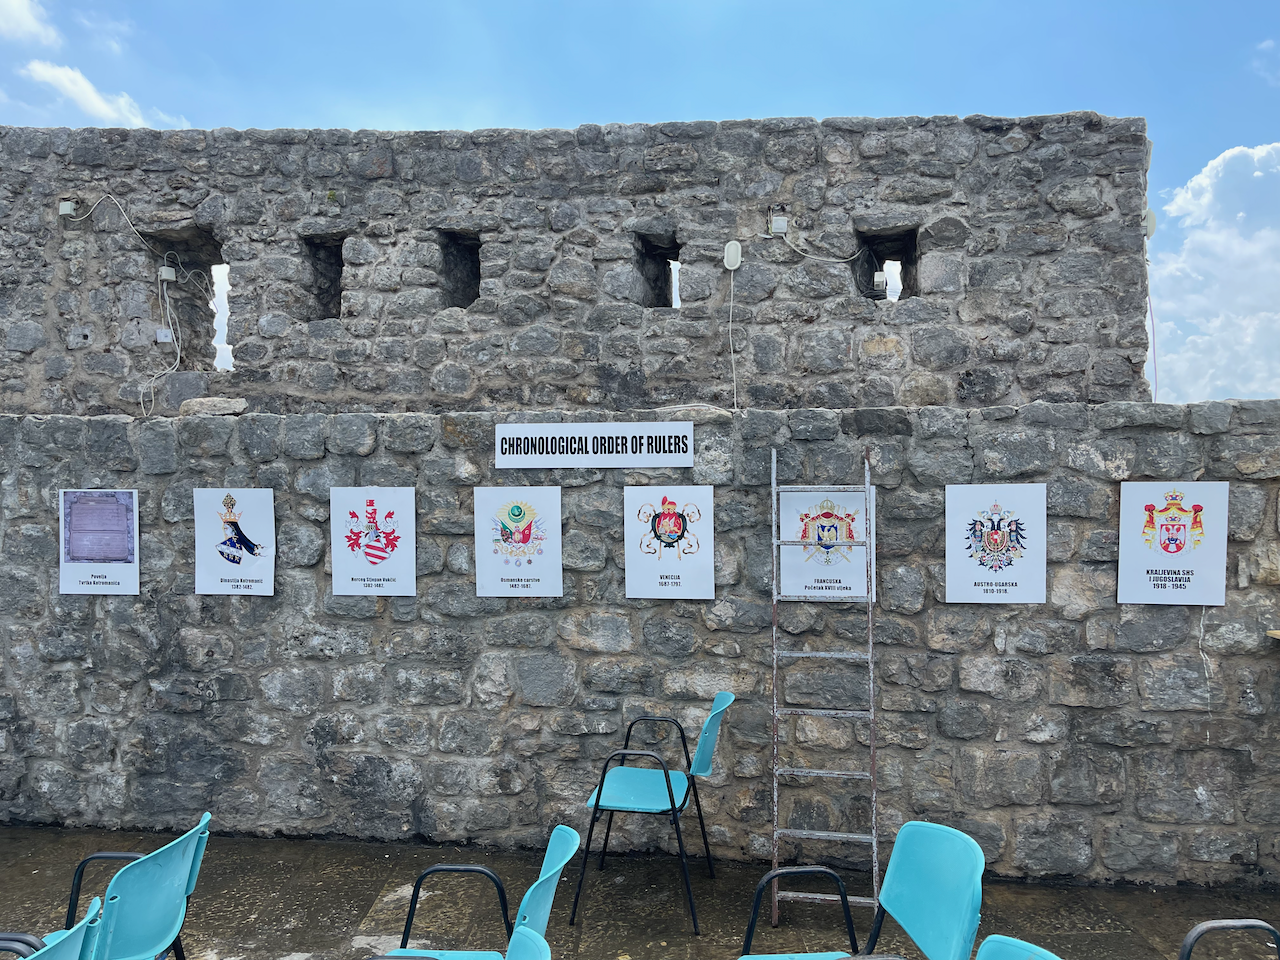 castle wall with 8 signs in a timeline, showing different empires